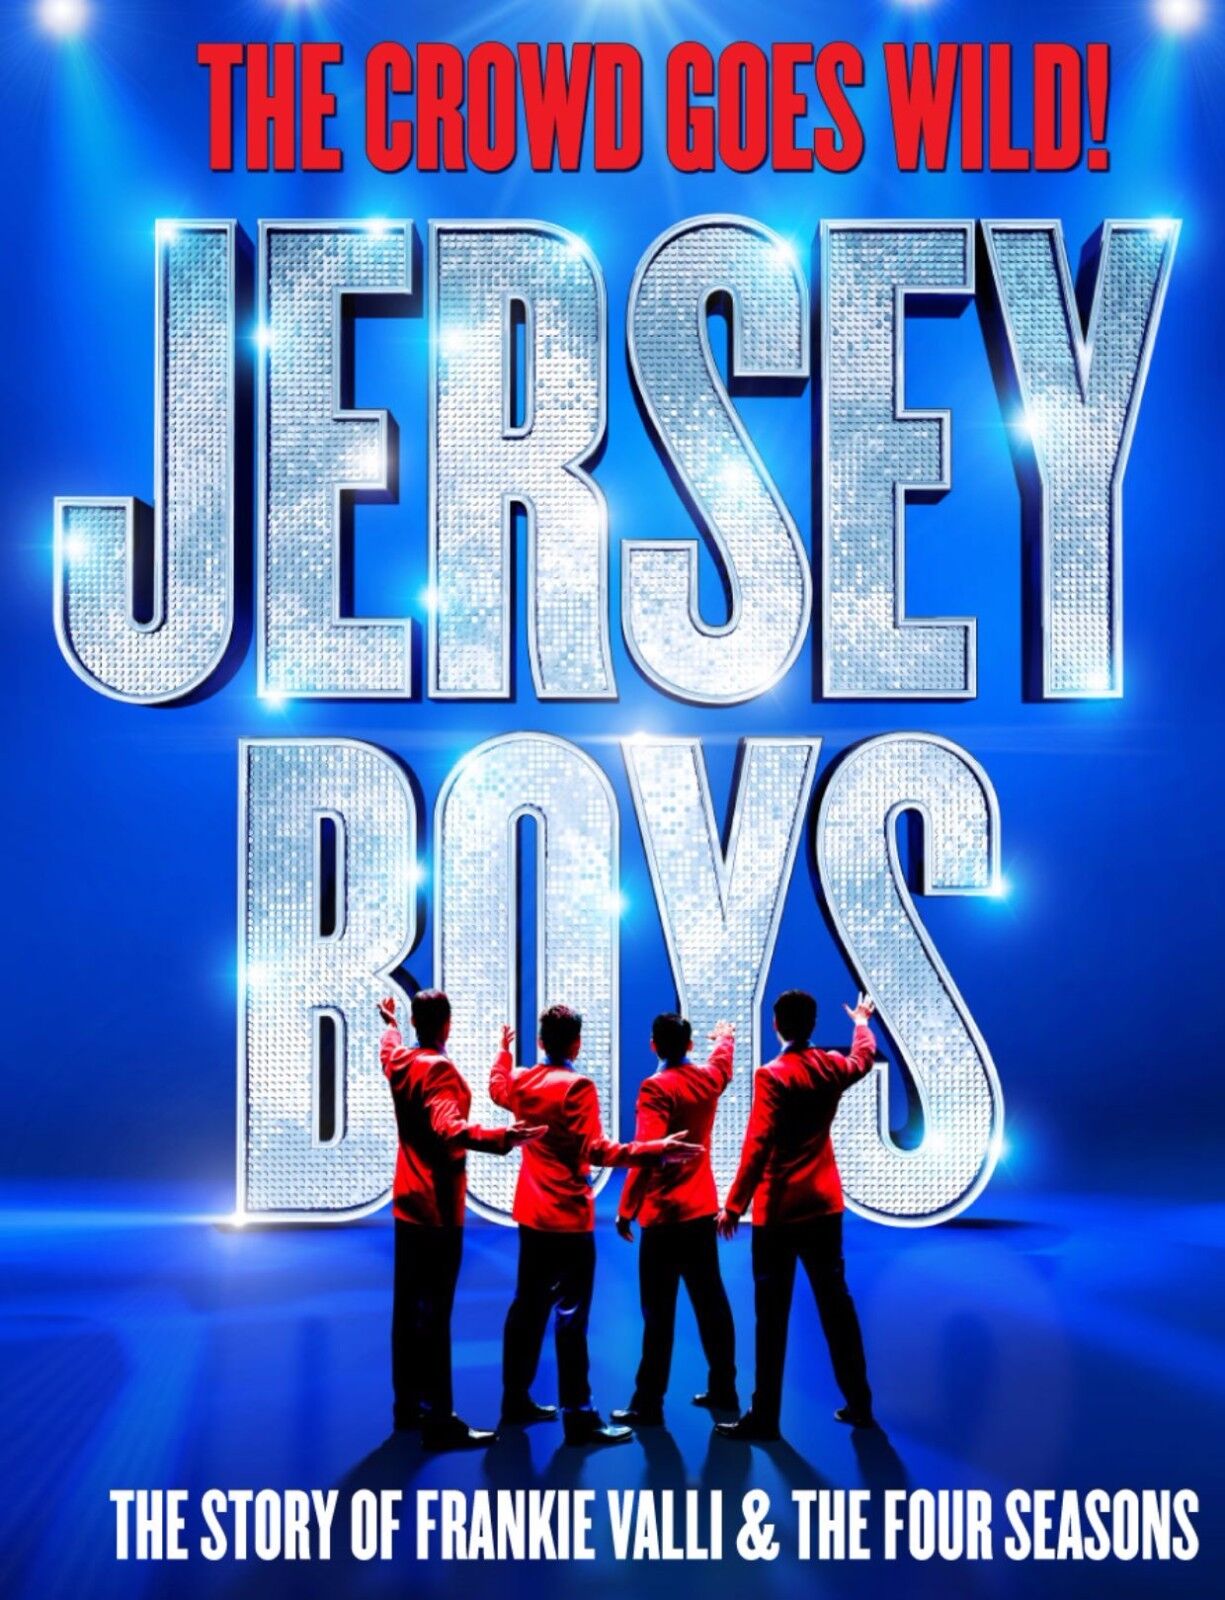 images/shows/JerseyBoys.jpg